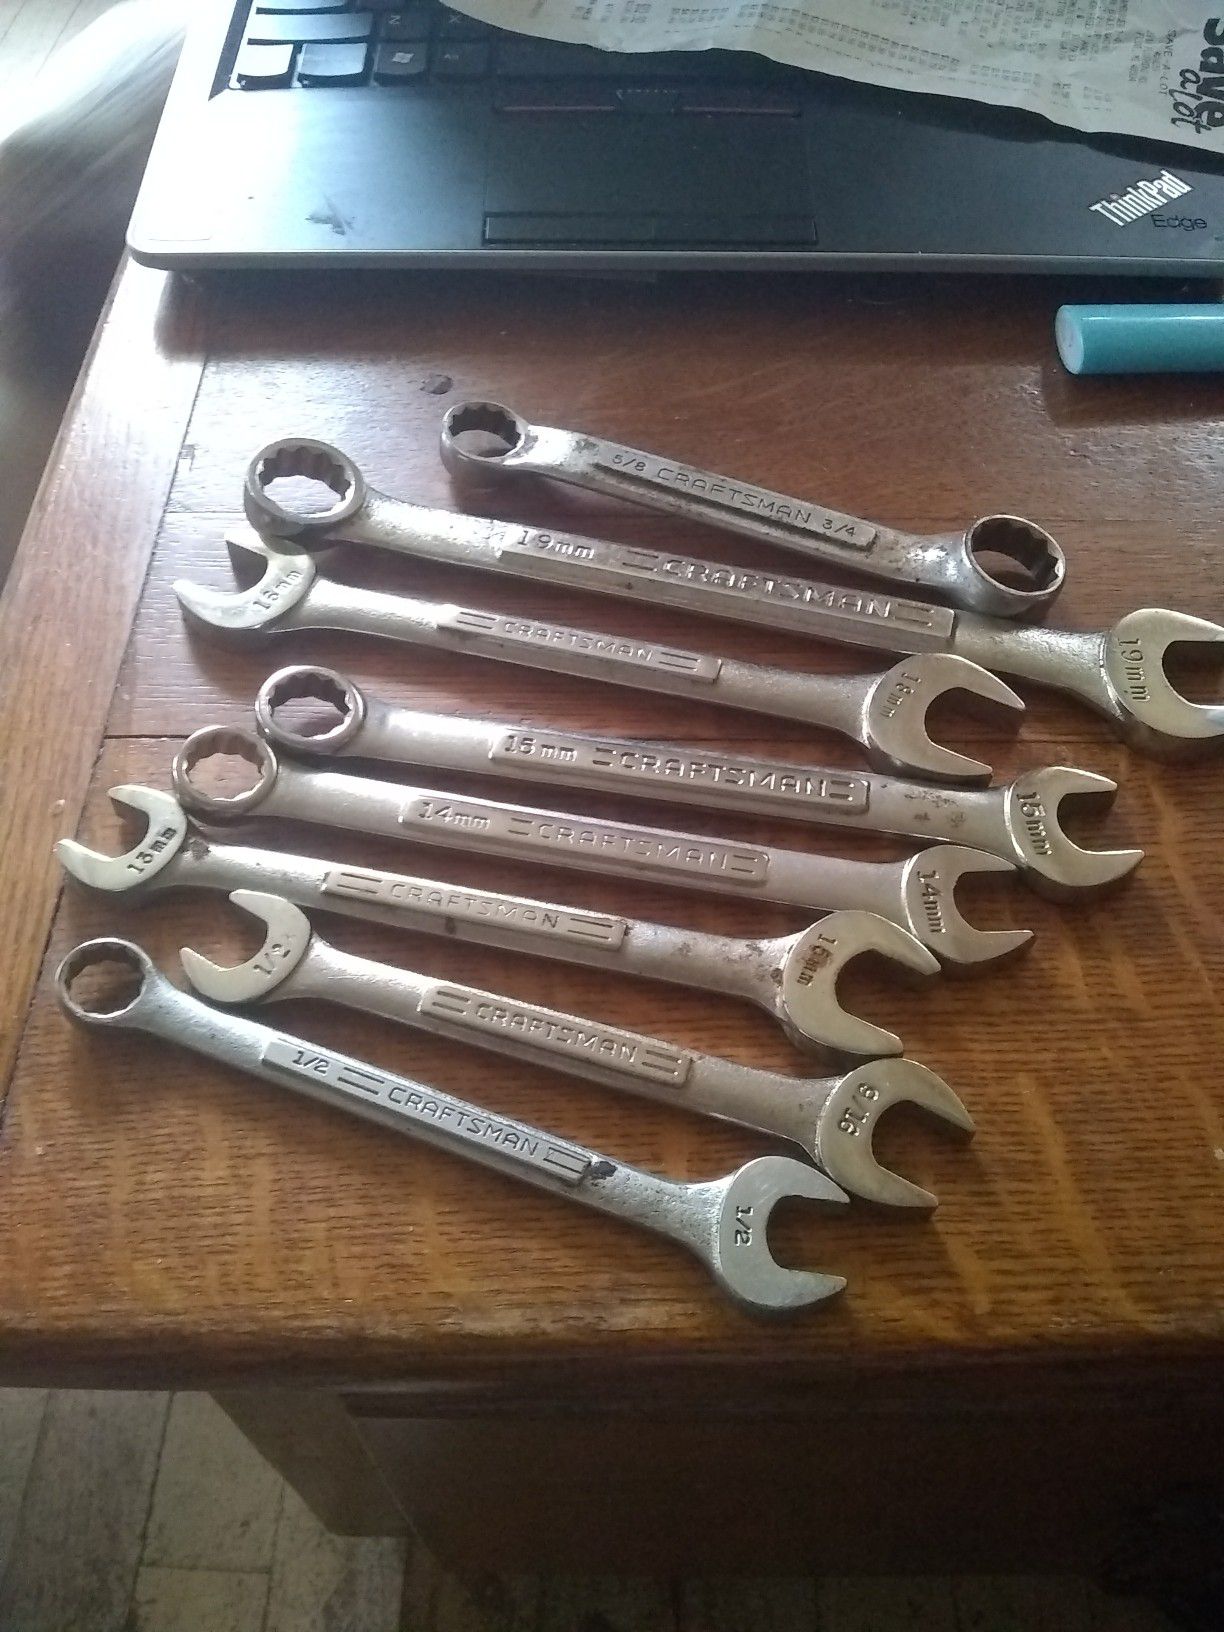 8 Craftsman wrenches